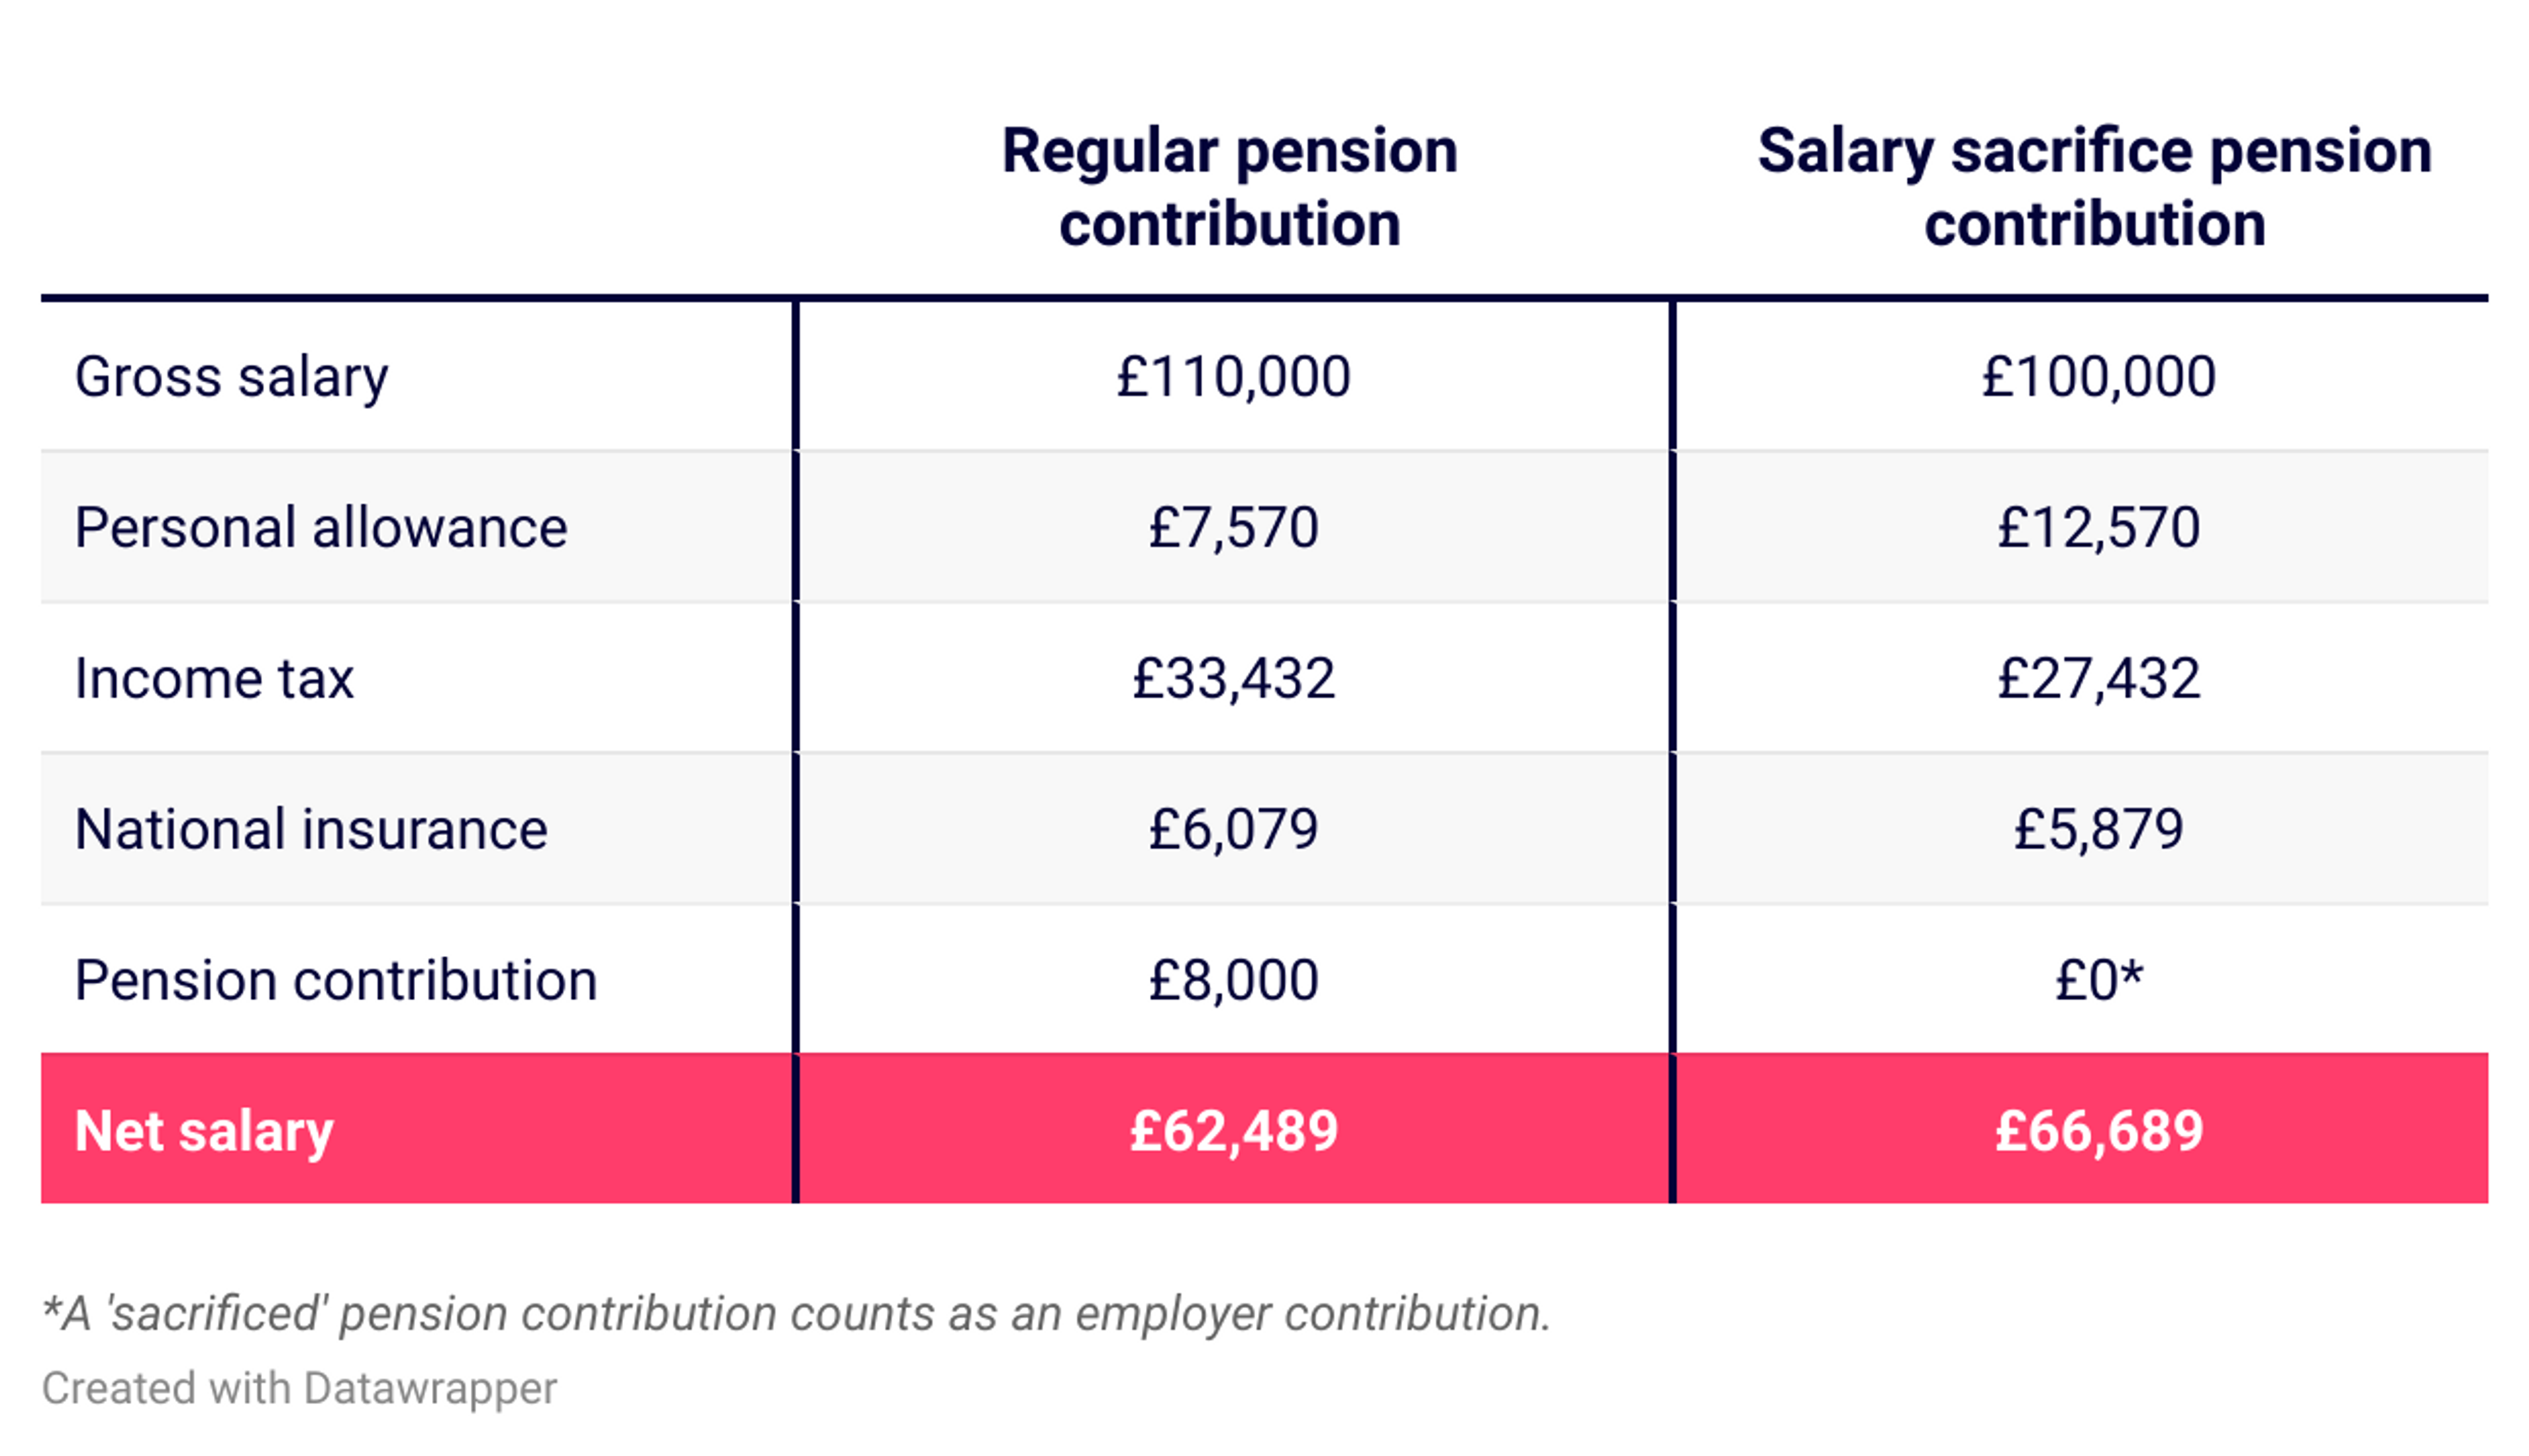 table comparing net pay with a regular pension contribution vs a salary sacrifice pension scheme for someone earning £110000